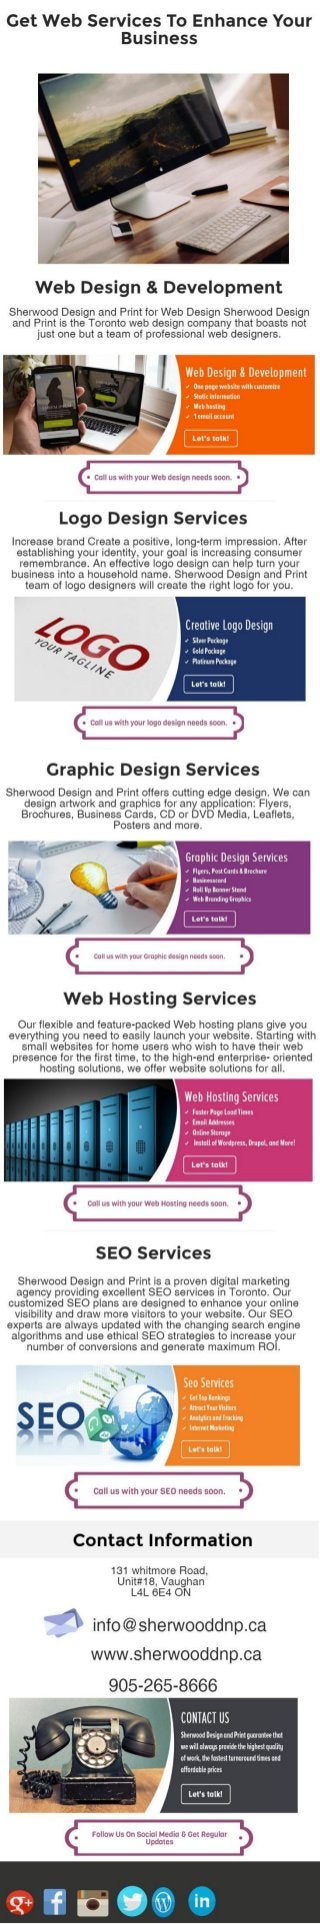 Get web services to enhance your business